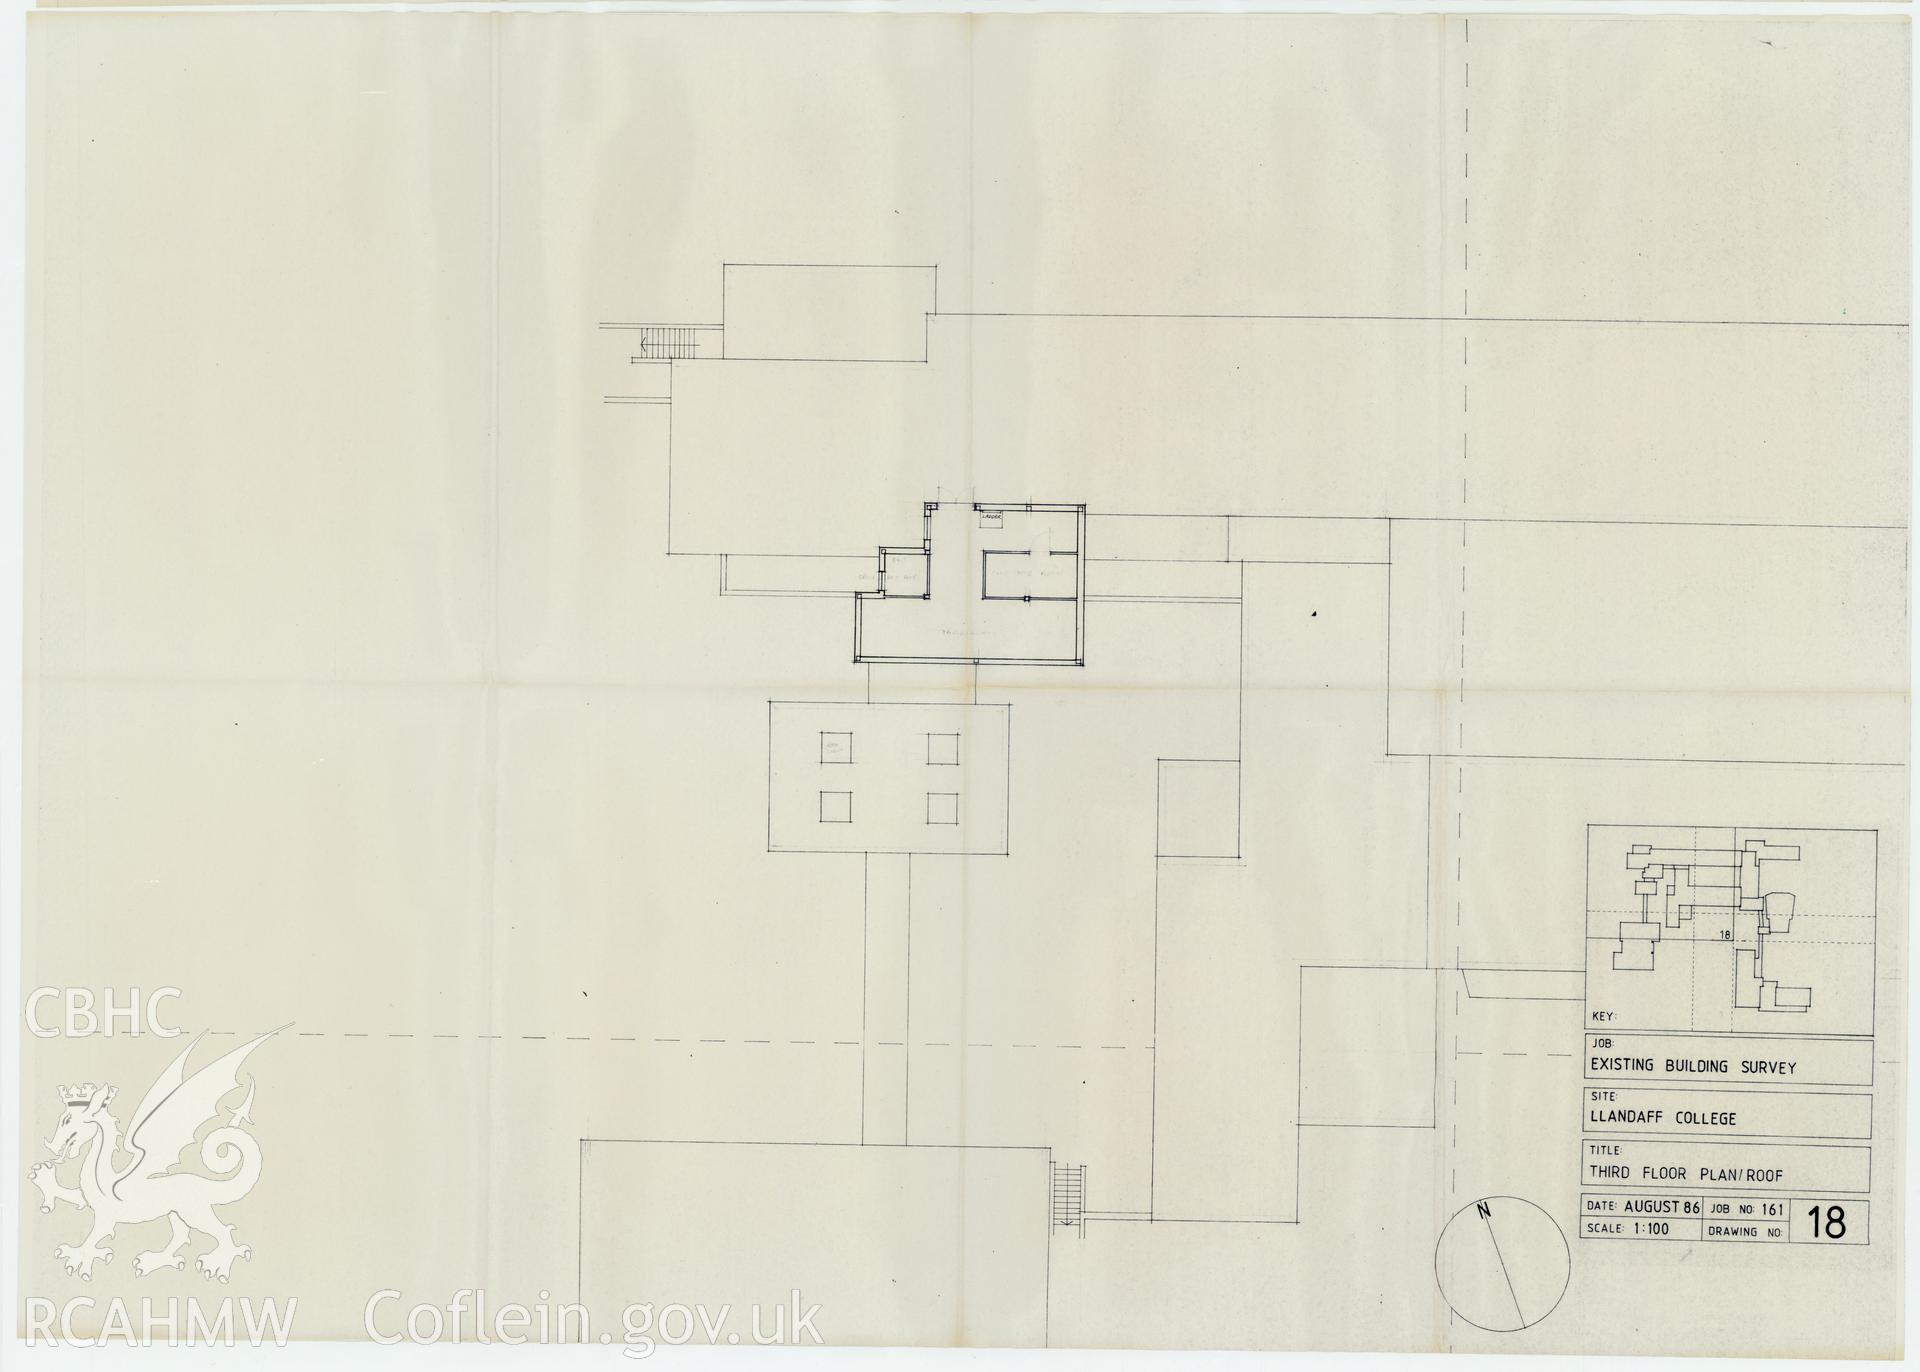 Plan of the third floor of Llandaff College, Cardiff. The existing building survey, August 1986, No 18.